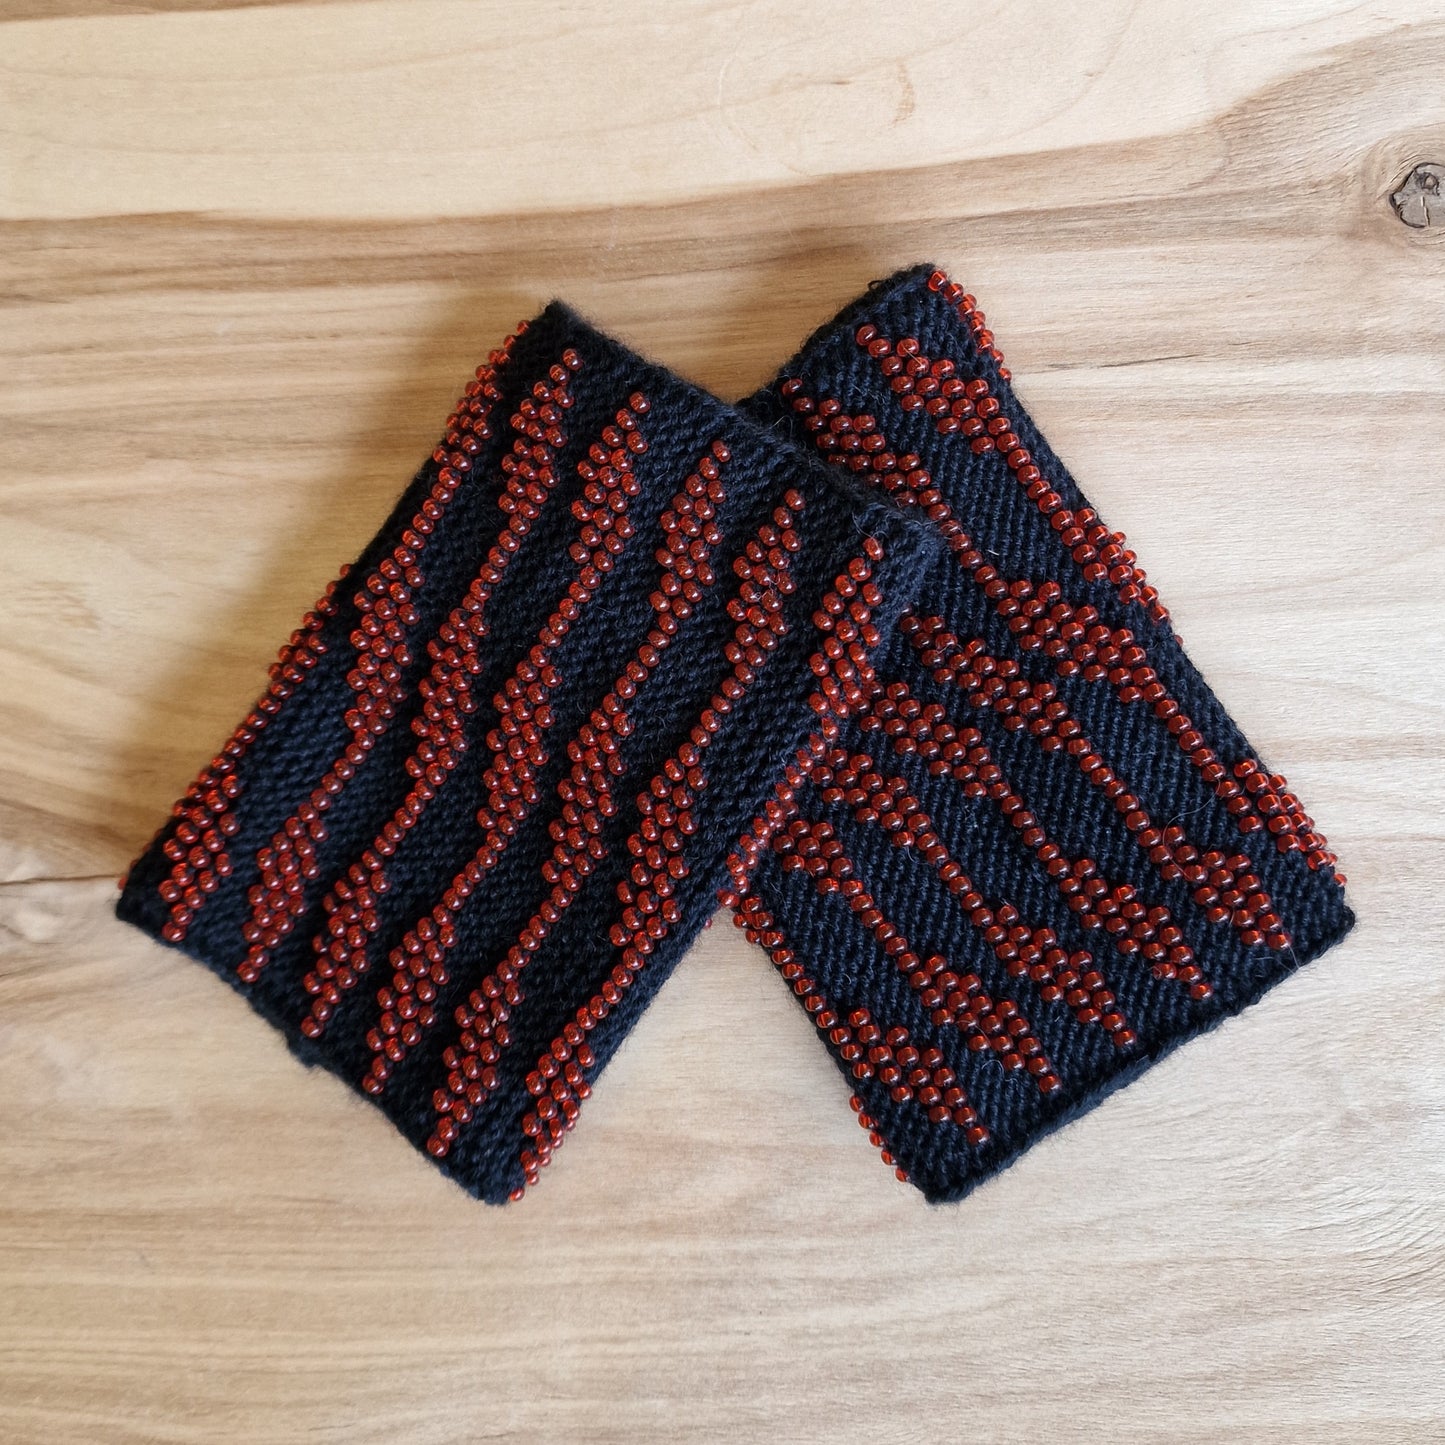 Black cuffs/pulse warmers with red beads (ANST 36)